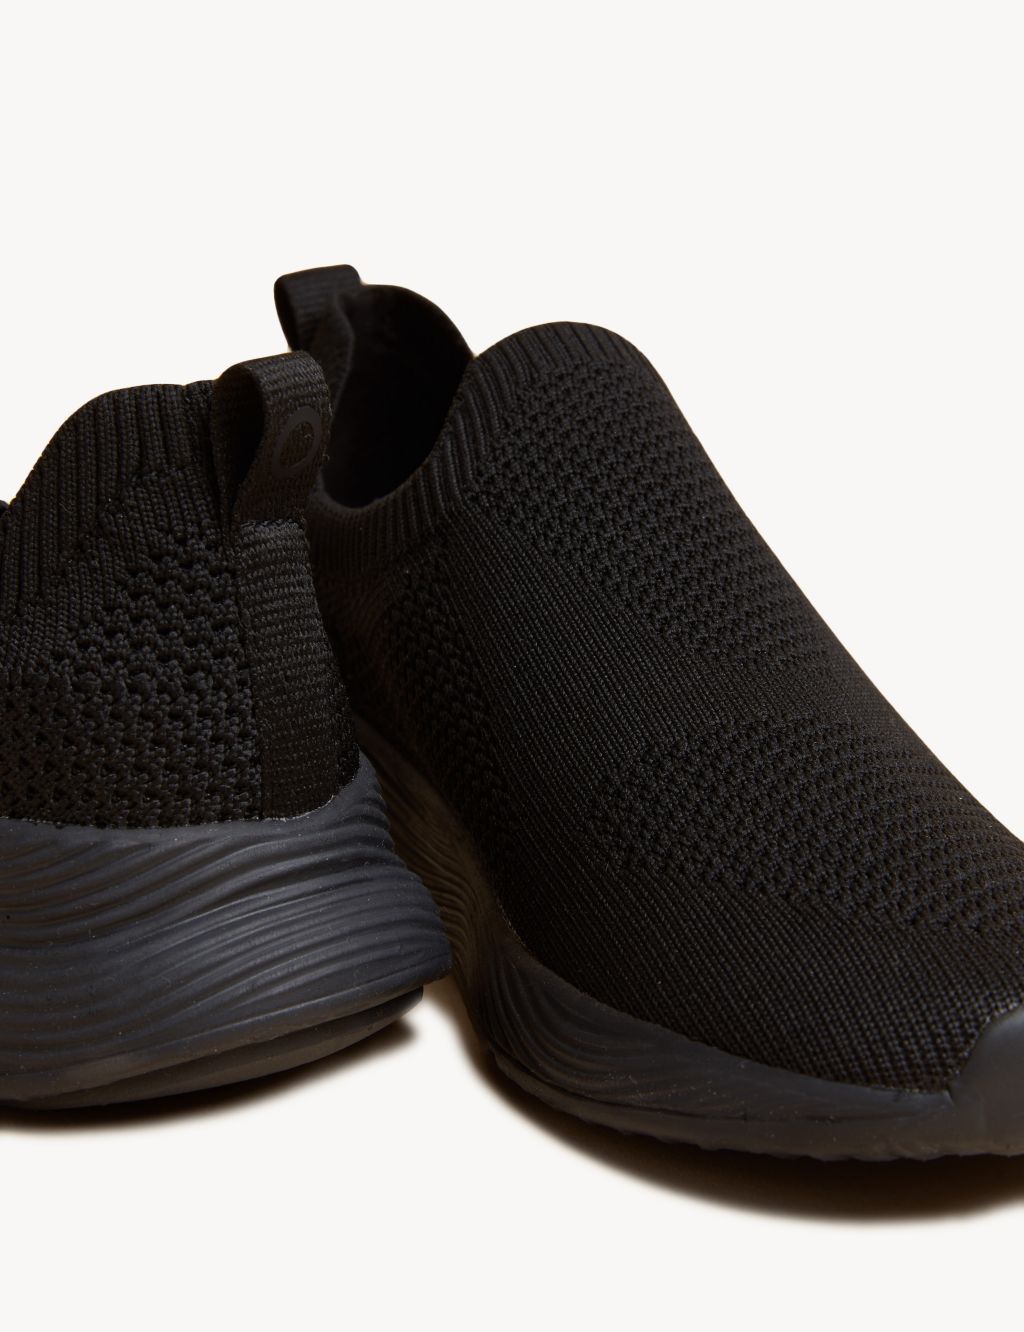 Knitted Slip On Trainers image 4